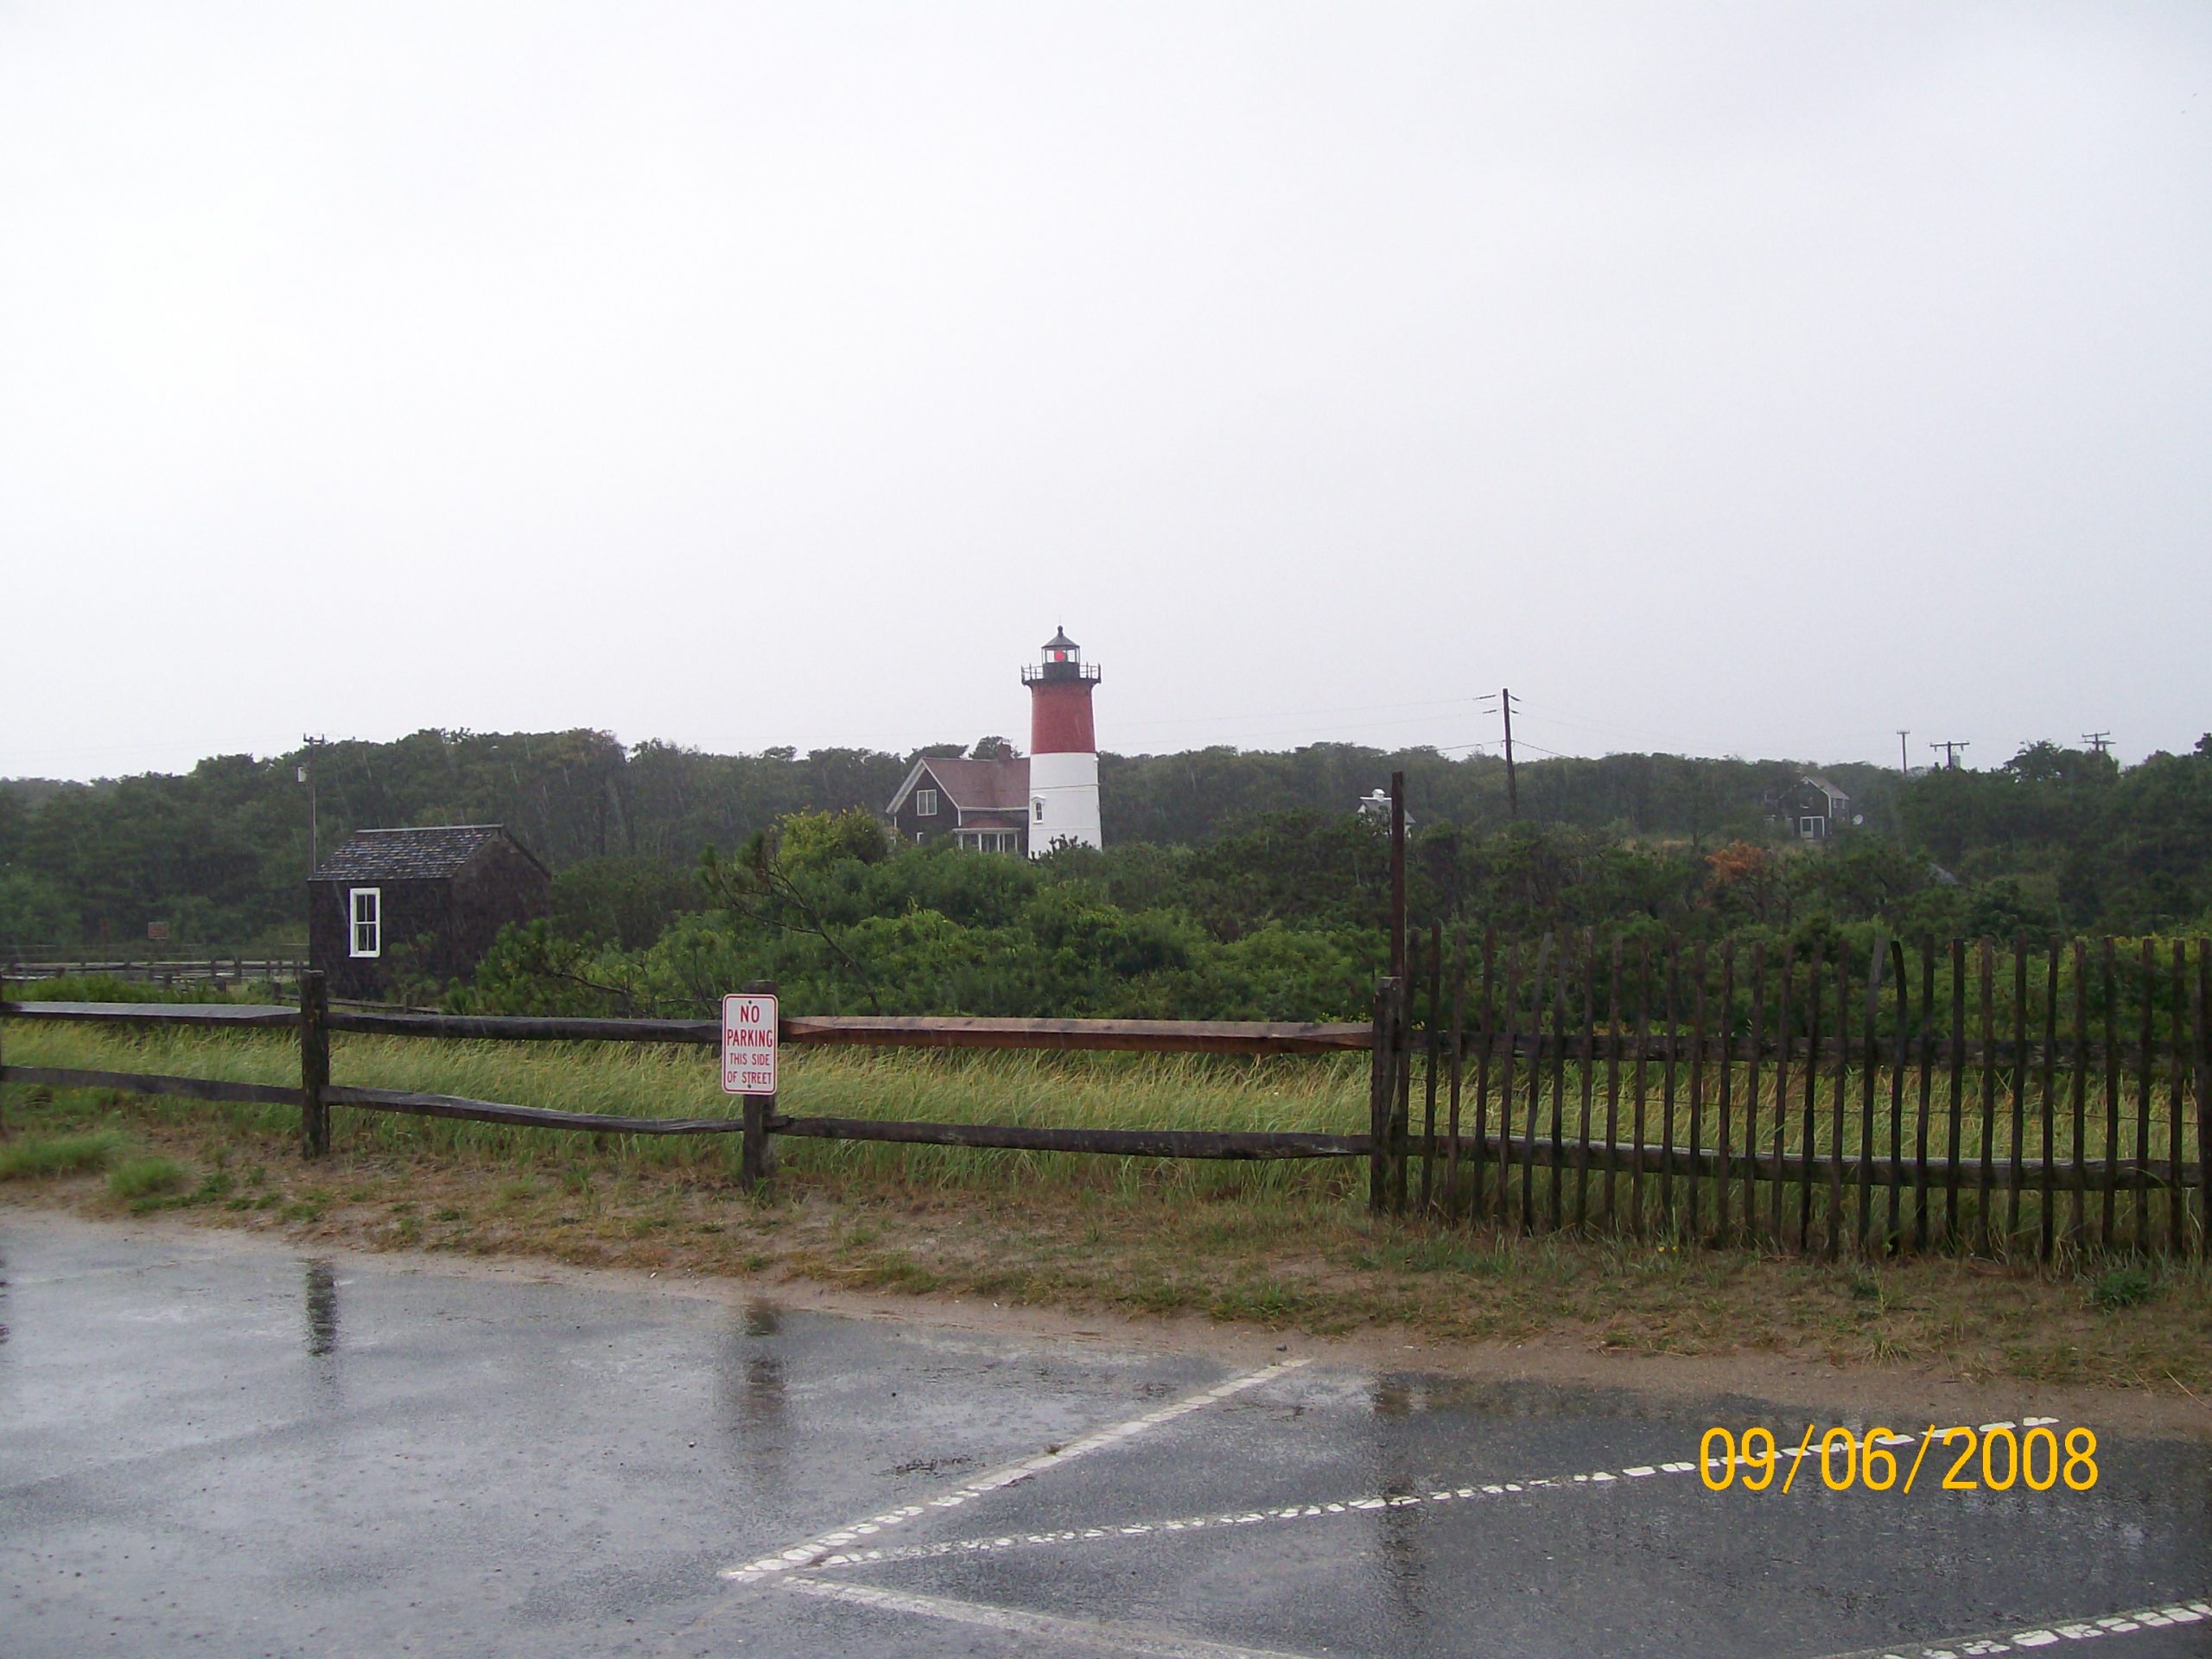 Nauset Light (user submitted)